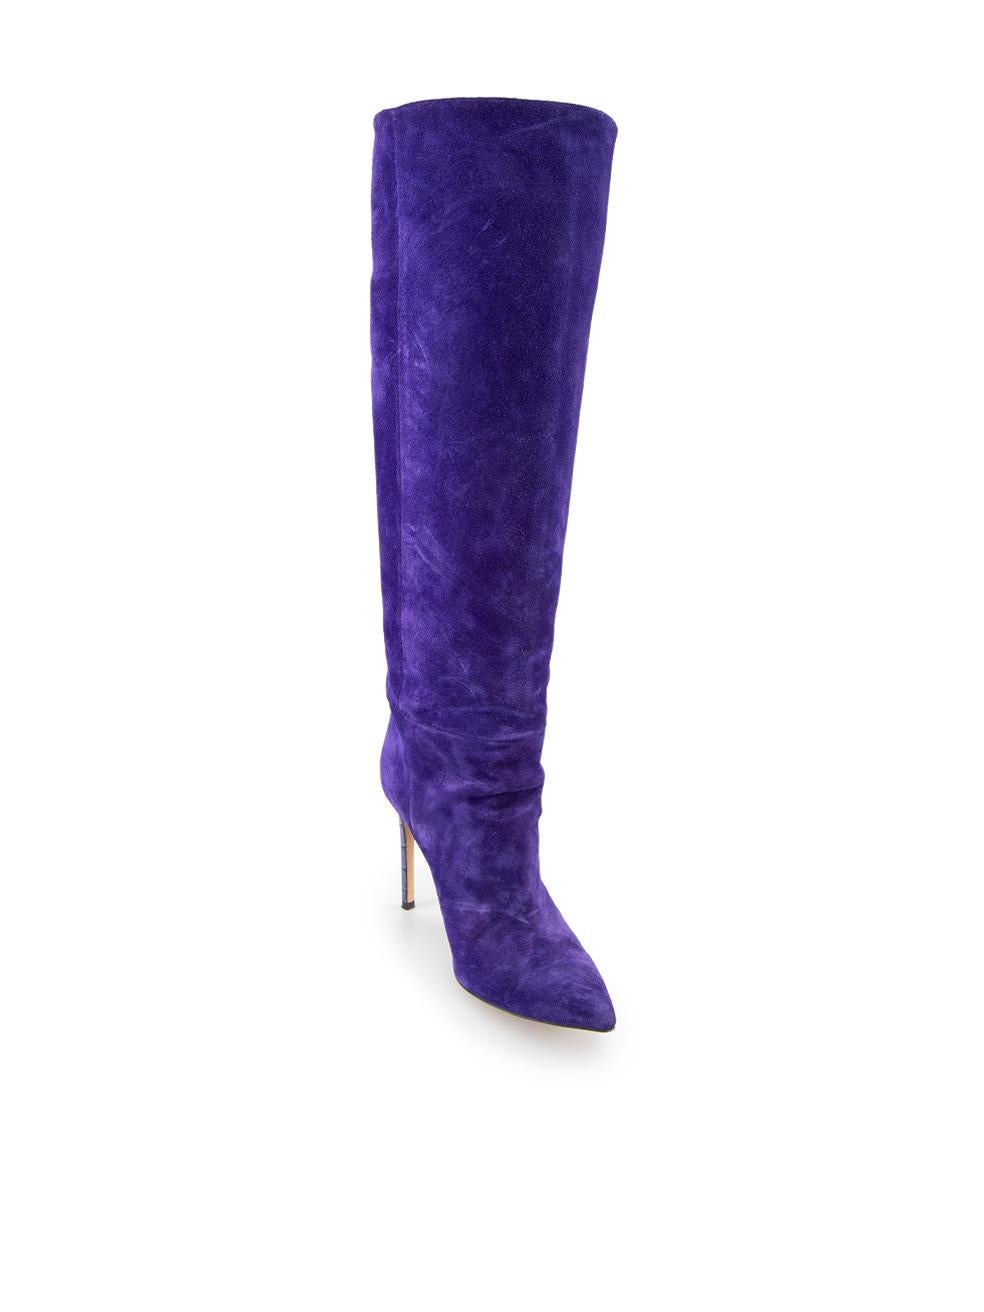 CONDITION is Good. Light scratching along suede. Minor wear along this used Paris Texas designer resale item.



Details


Purple

Suede

Knee-high boots

Point-toe

Croc embossed heel



 

Made in Italy 

 

Composition

EXTERIOR: Suede

INTERIOR: